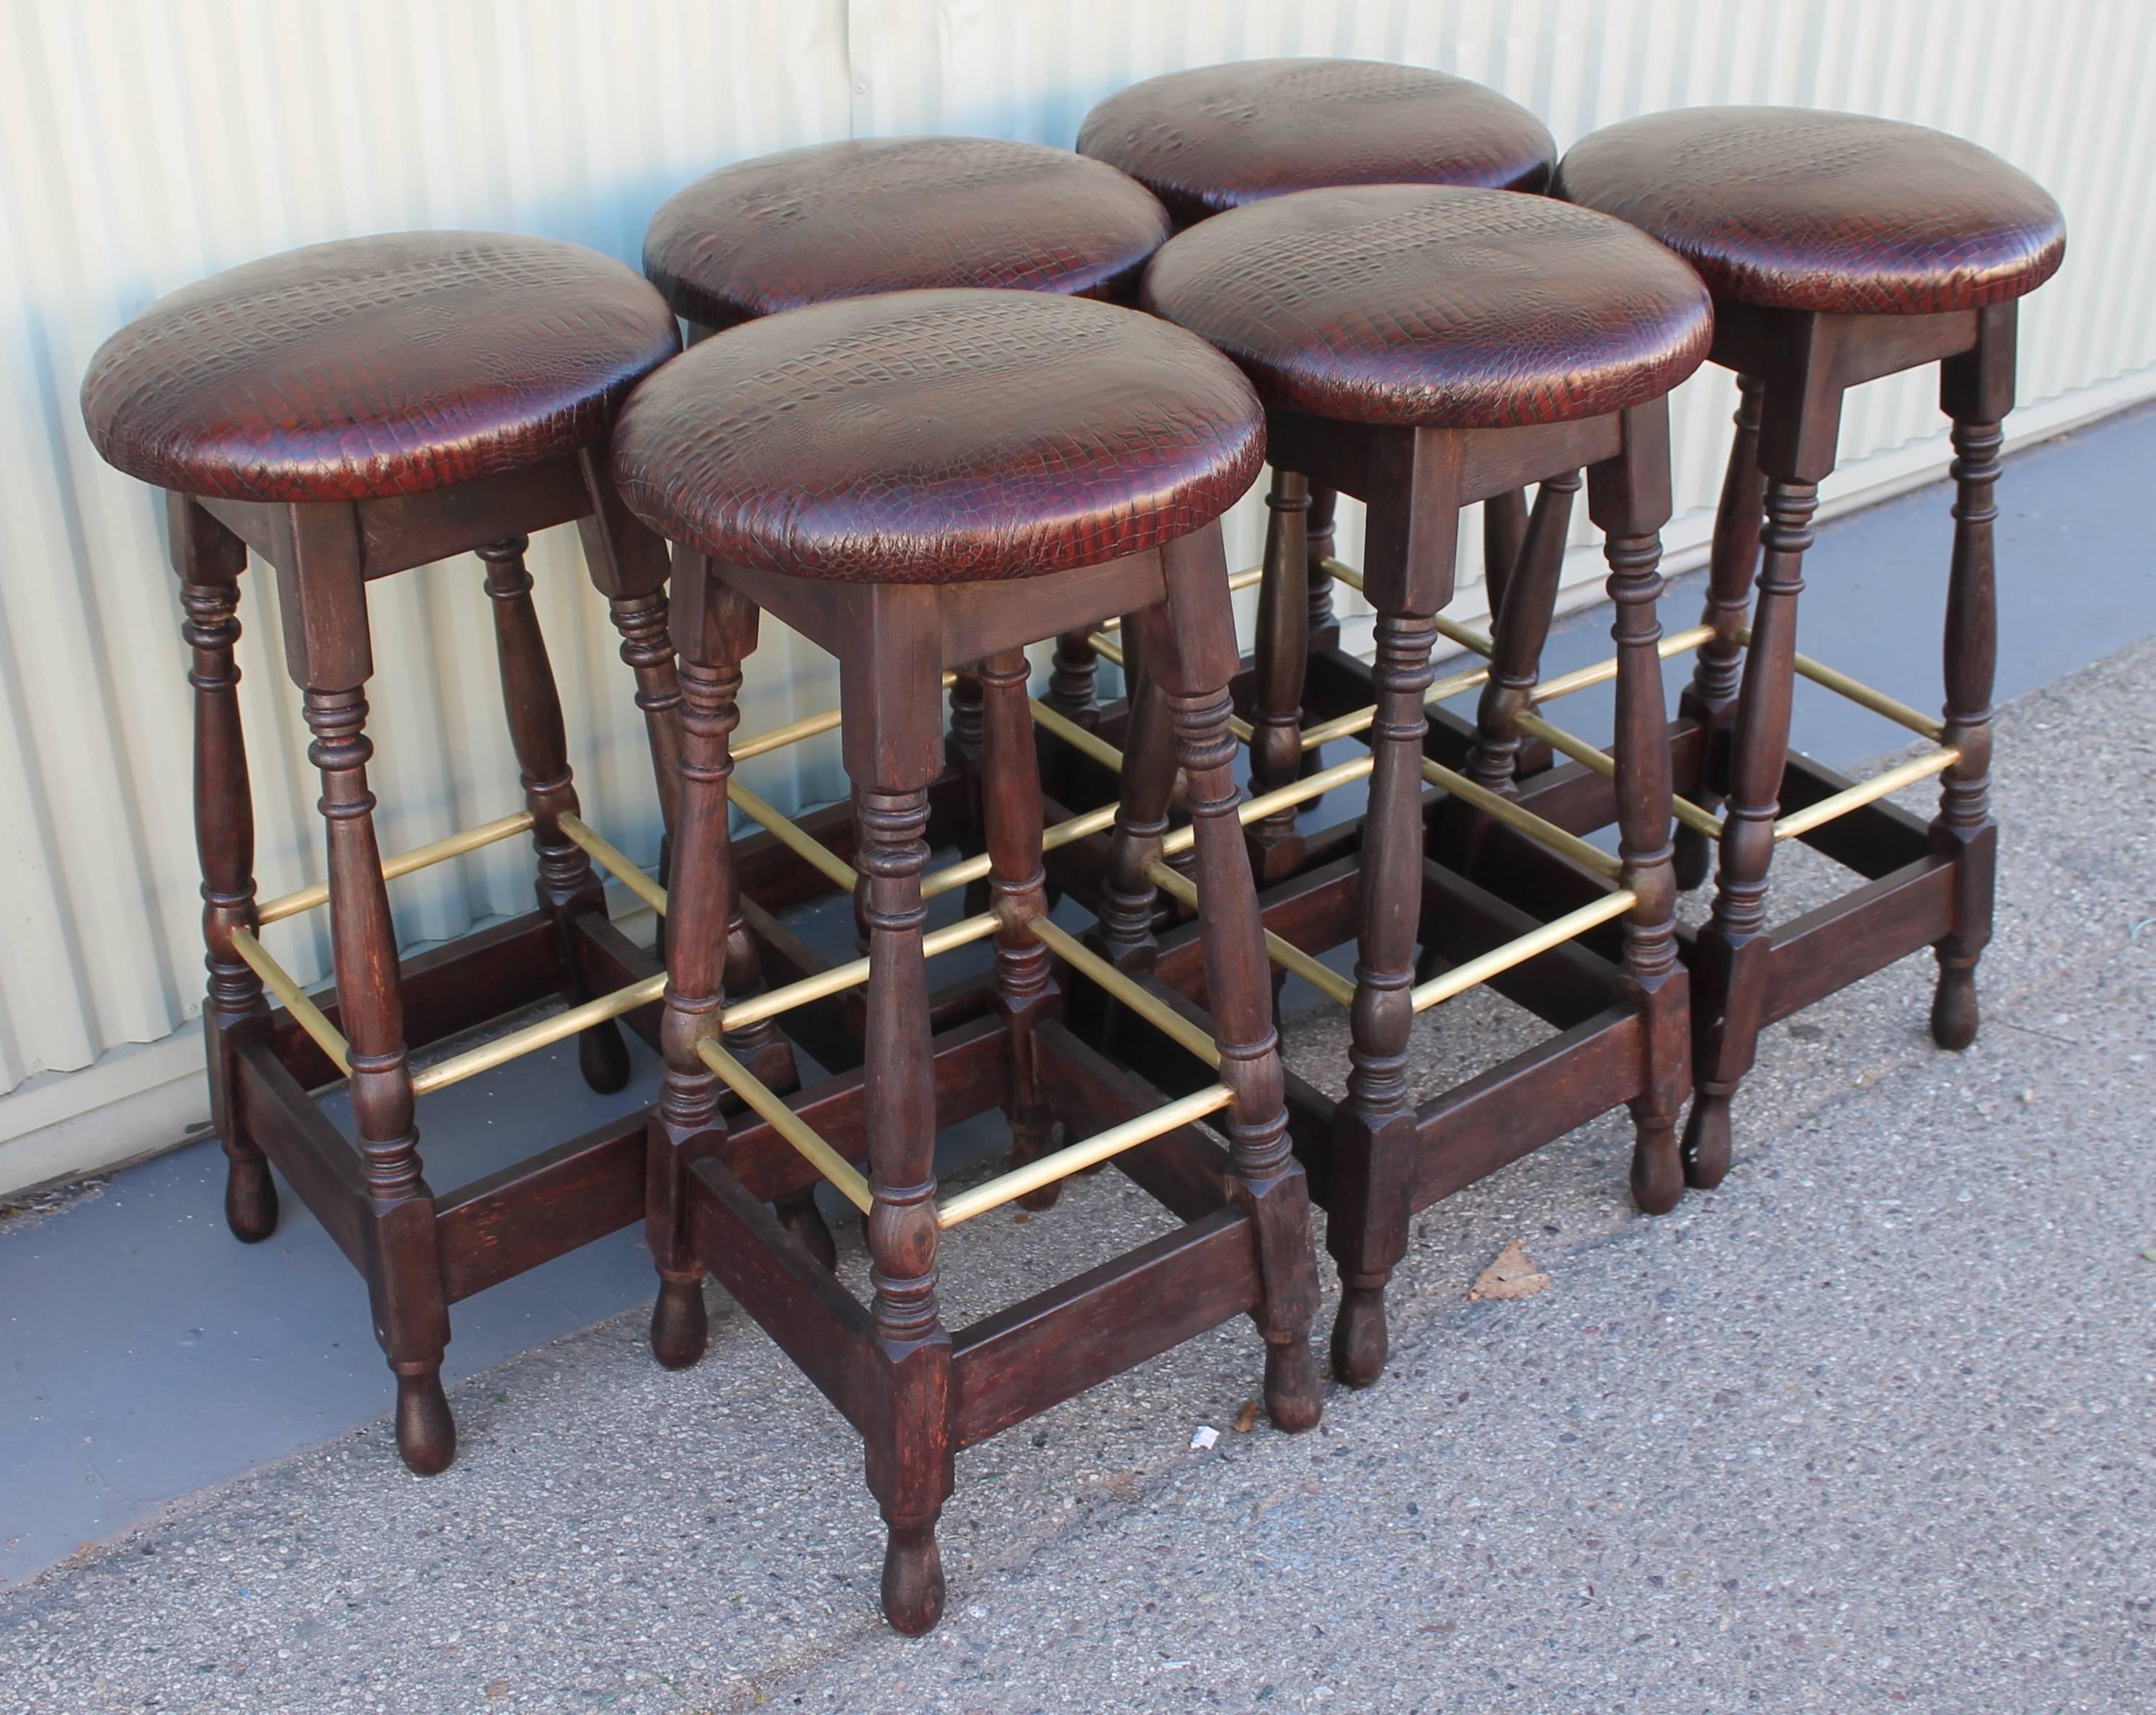 American Craftsman Set of Six Mid-Century Bar Stools Upholstered in Faux Alligator Leather